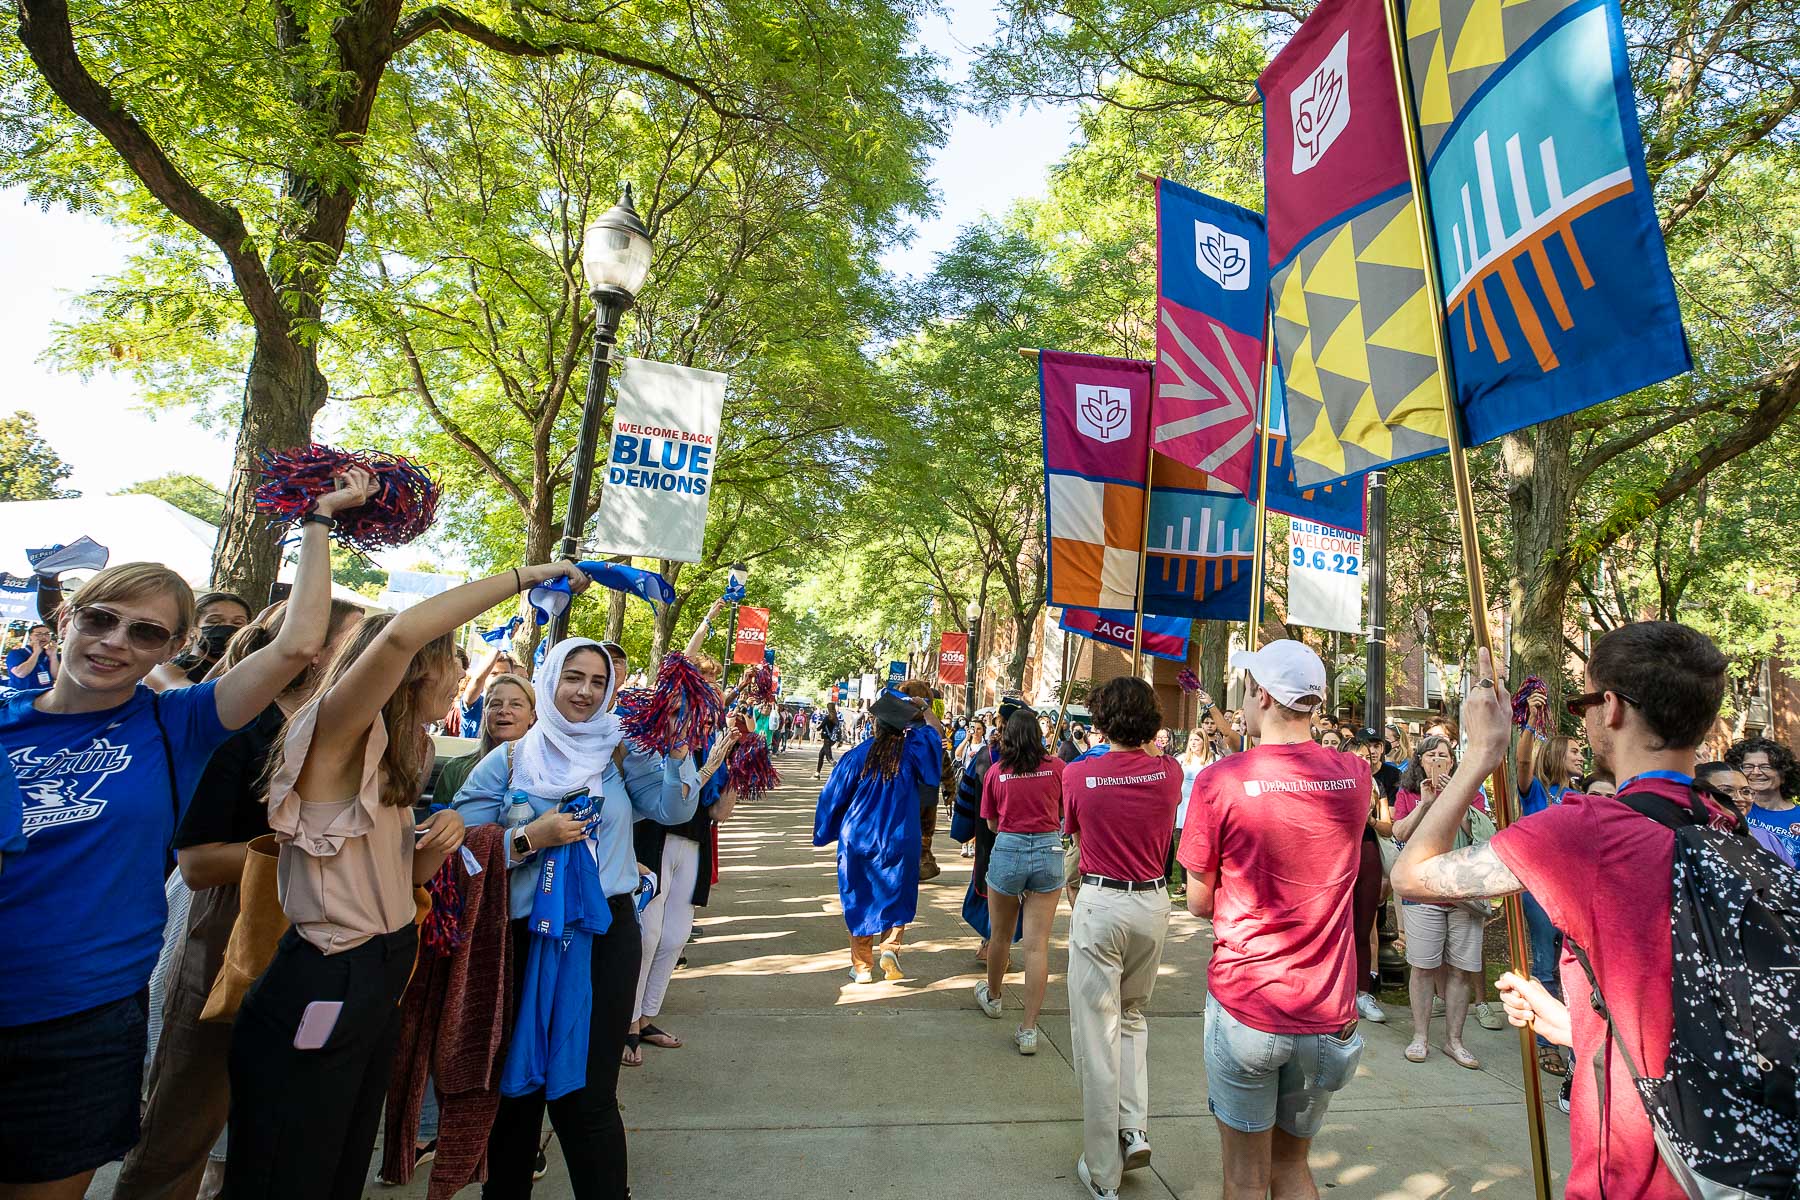 Students carried college banners into the quad while being cheered on by faculty, staff and current students. (DePaul University/Jeff Carrion)